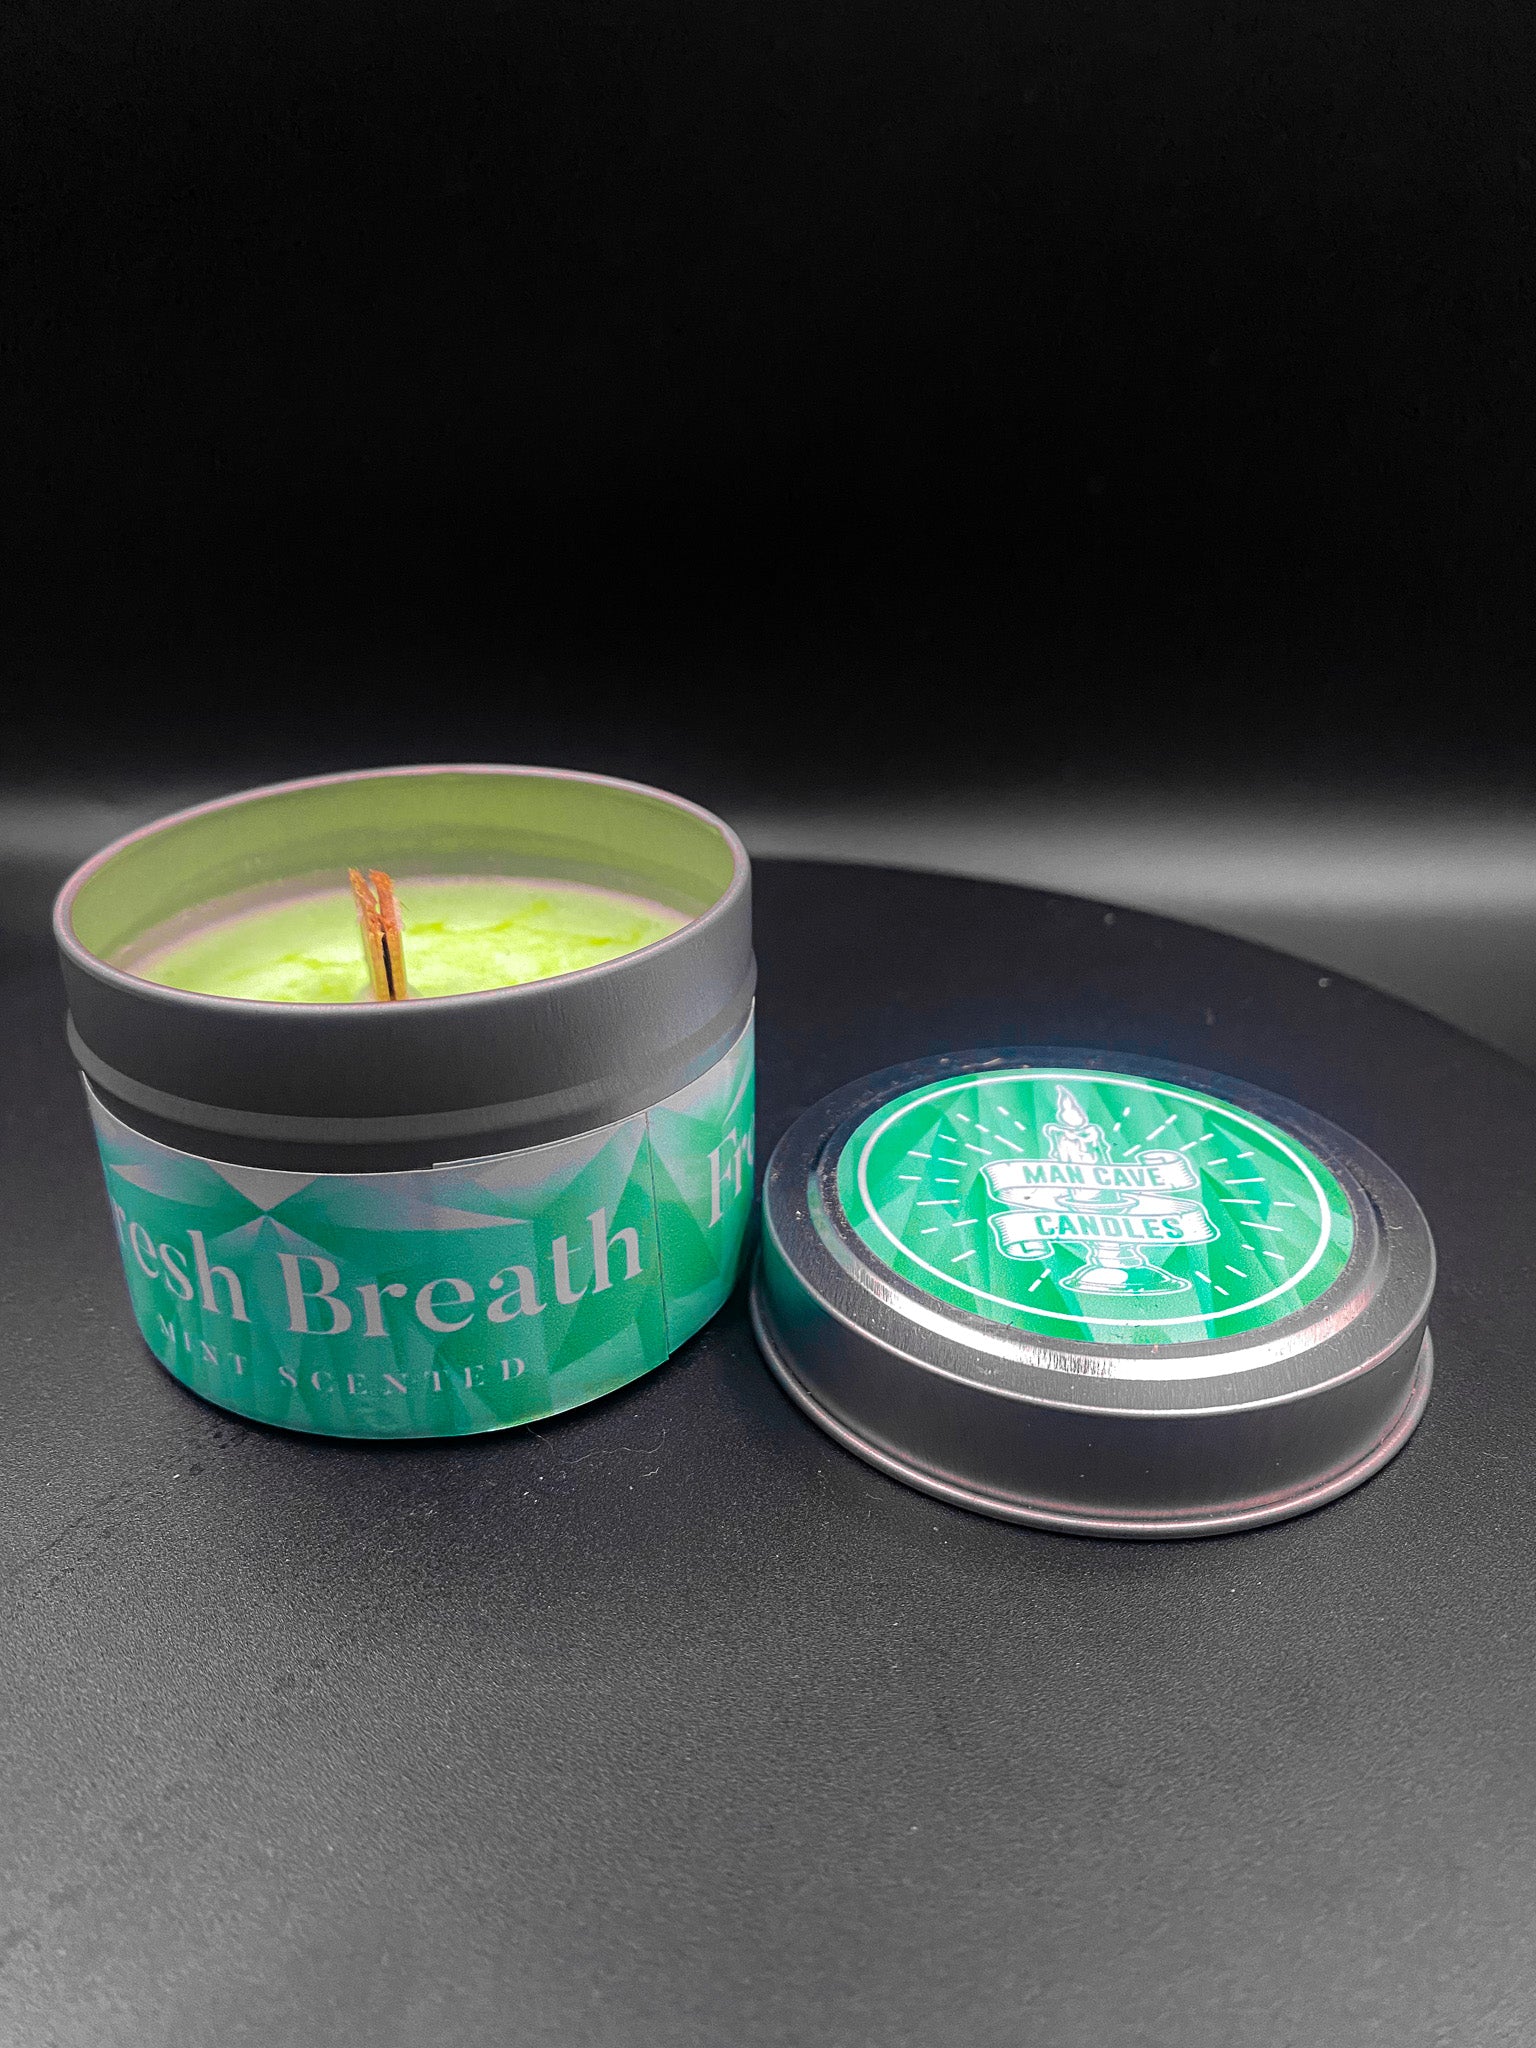 Fresh Breath - Mint Scented Man Cave Candle